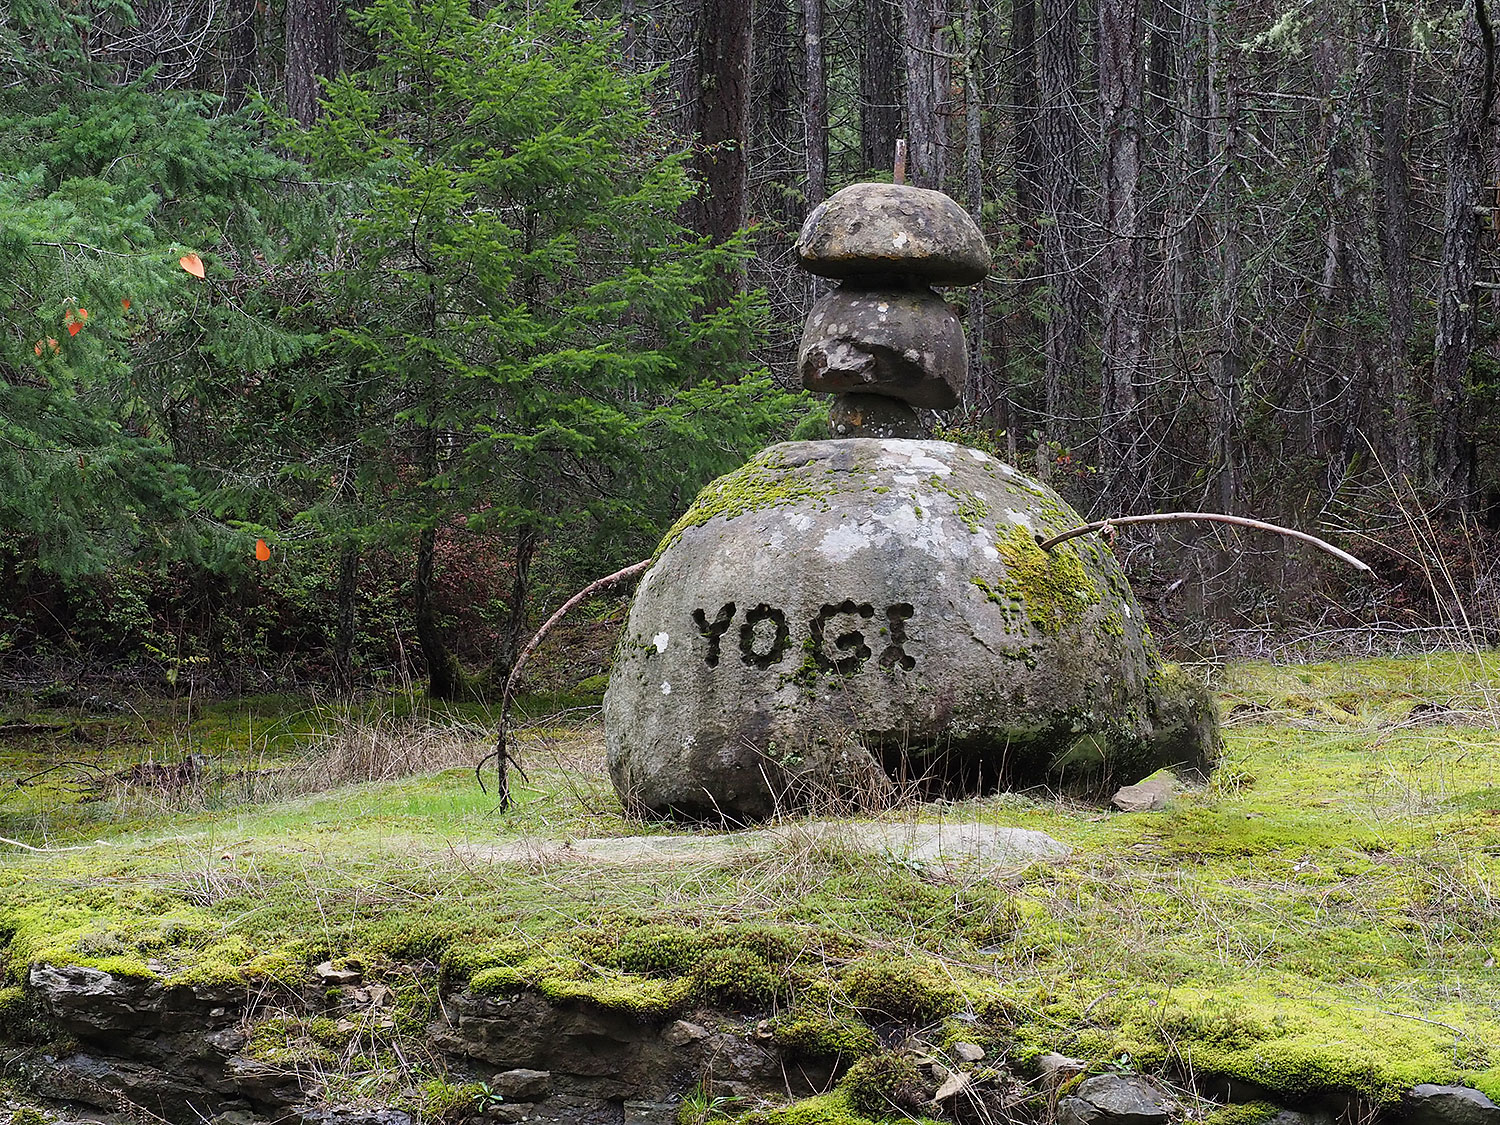 A sandstone sculpture by the edge of the road. It consists of a large round boulder with the word YOGI drilled into it and smaller stones piled on top. Two branches come out from either side. The overal effect is something like a human figure.